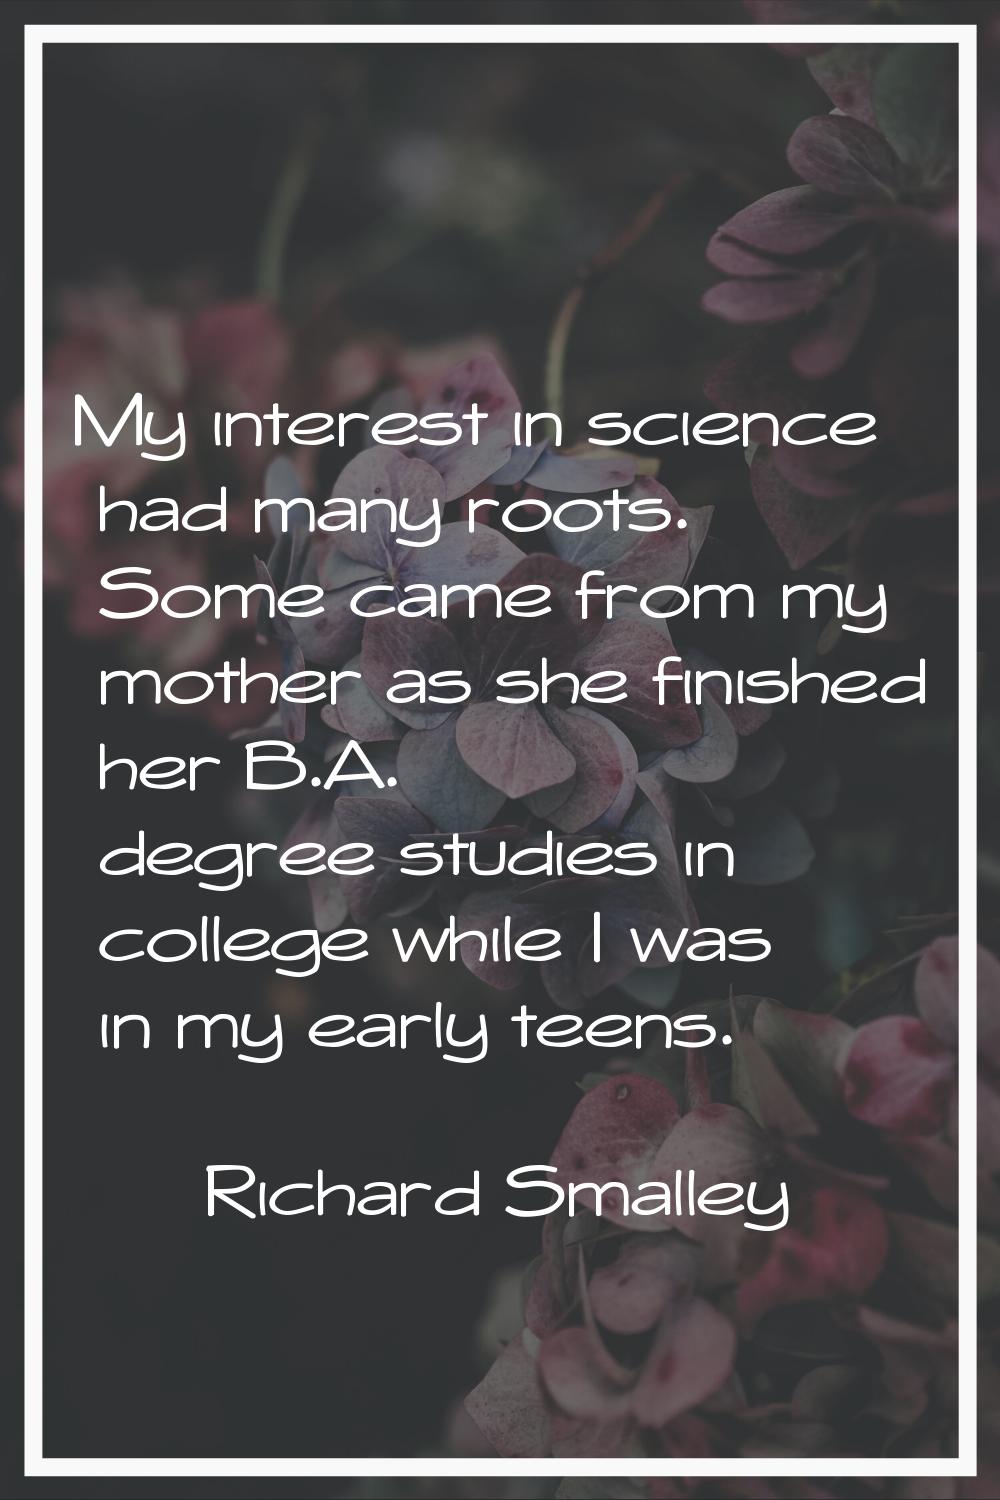 My interest in science had many roots. Some came from my mother as she finished her B.A. degree stu